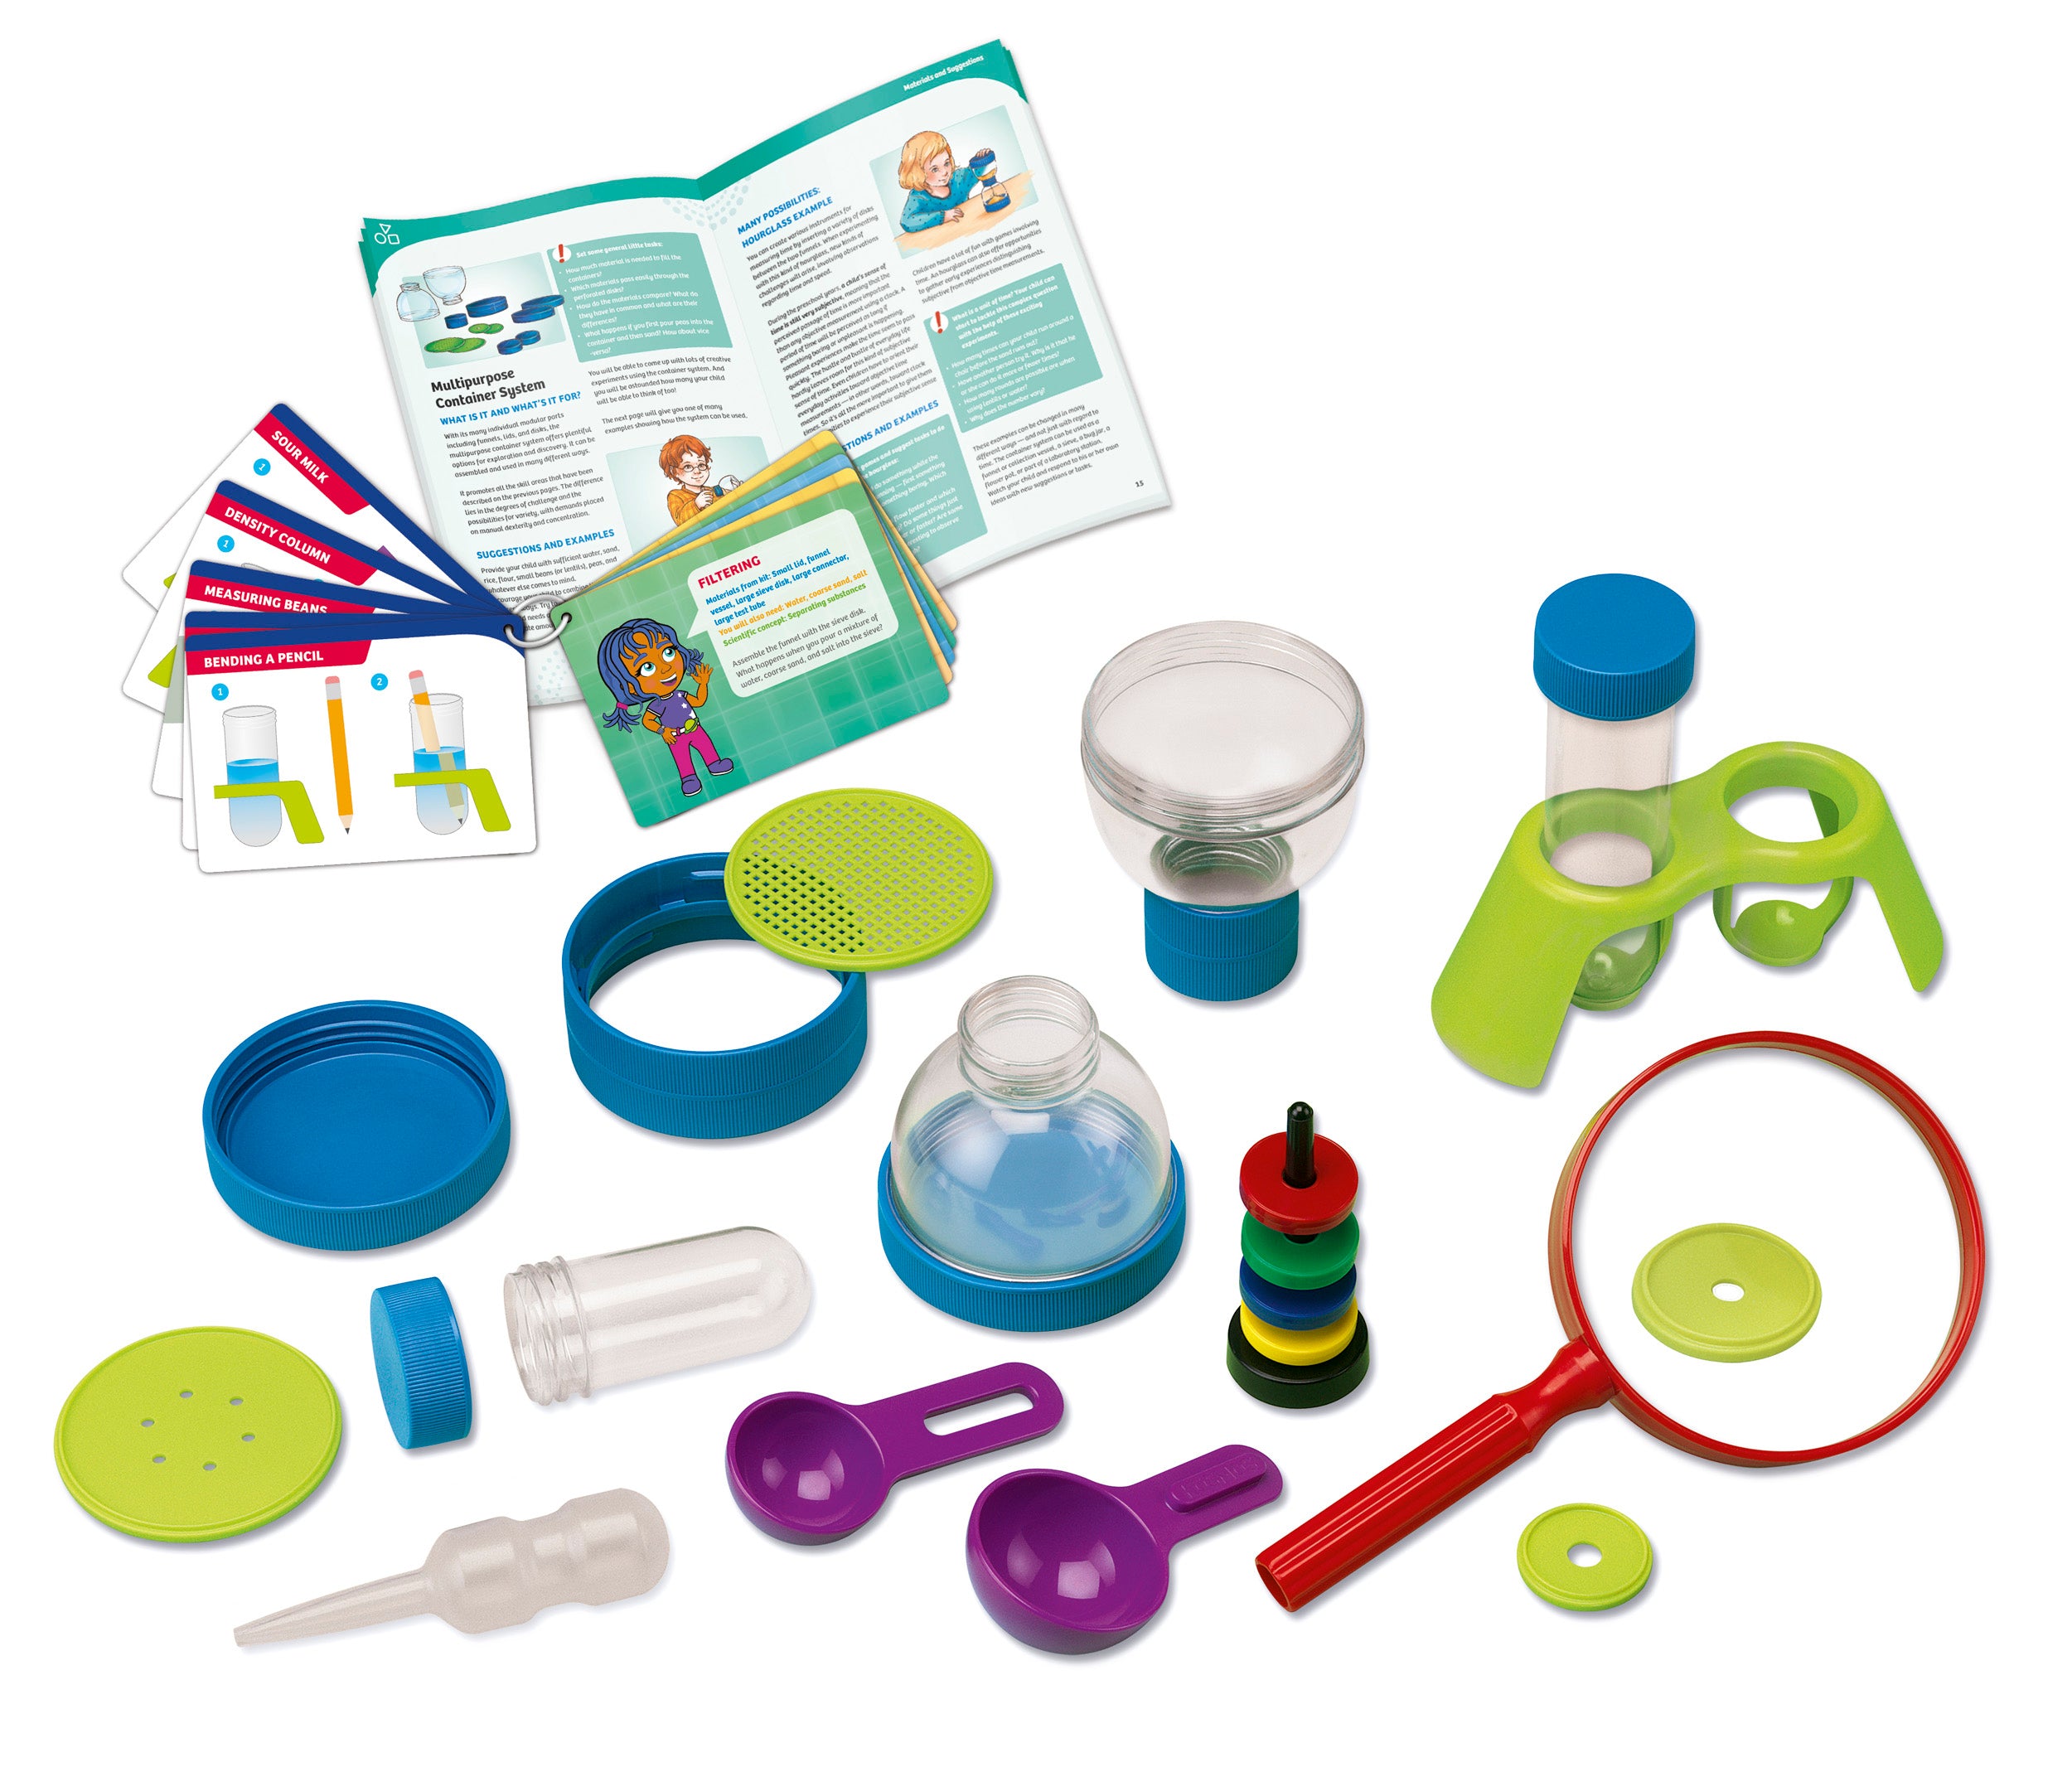 Kids First - Science Laboratory    